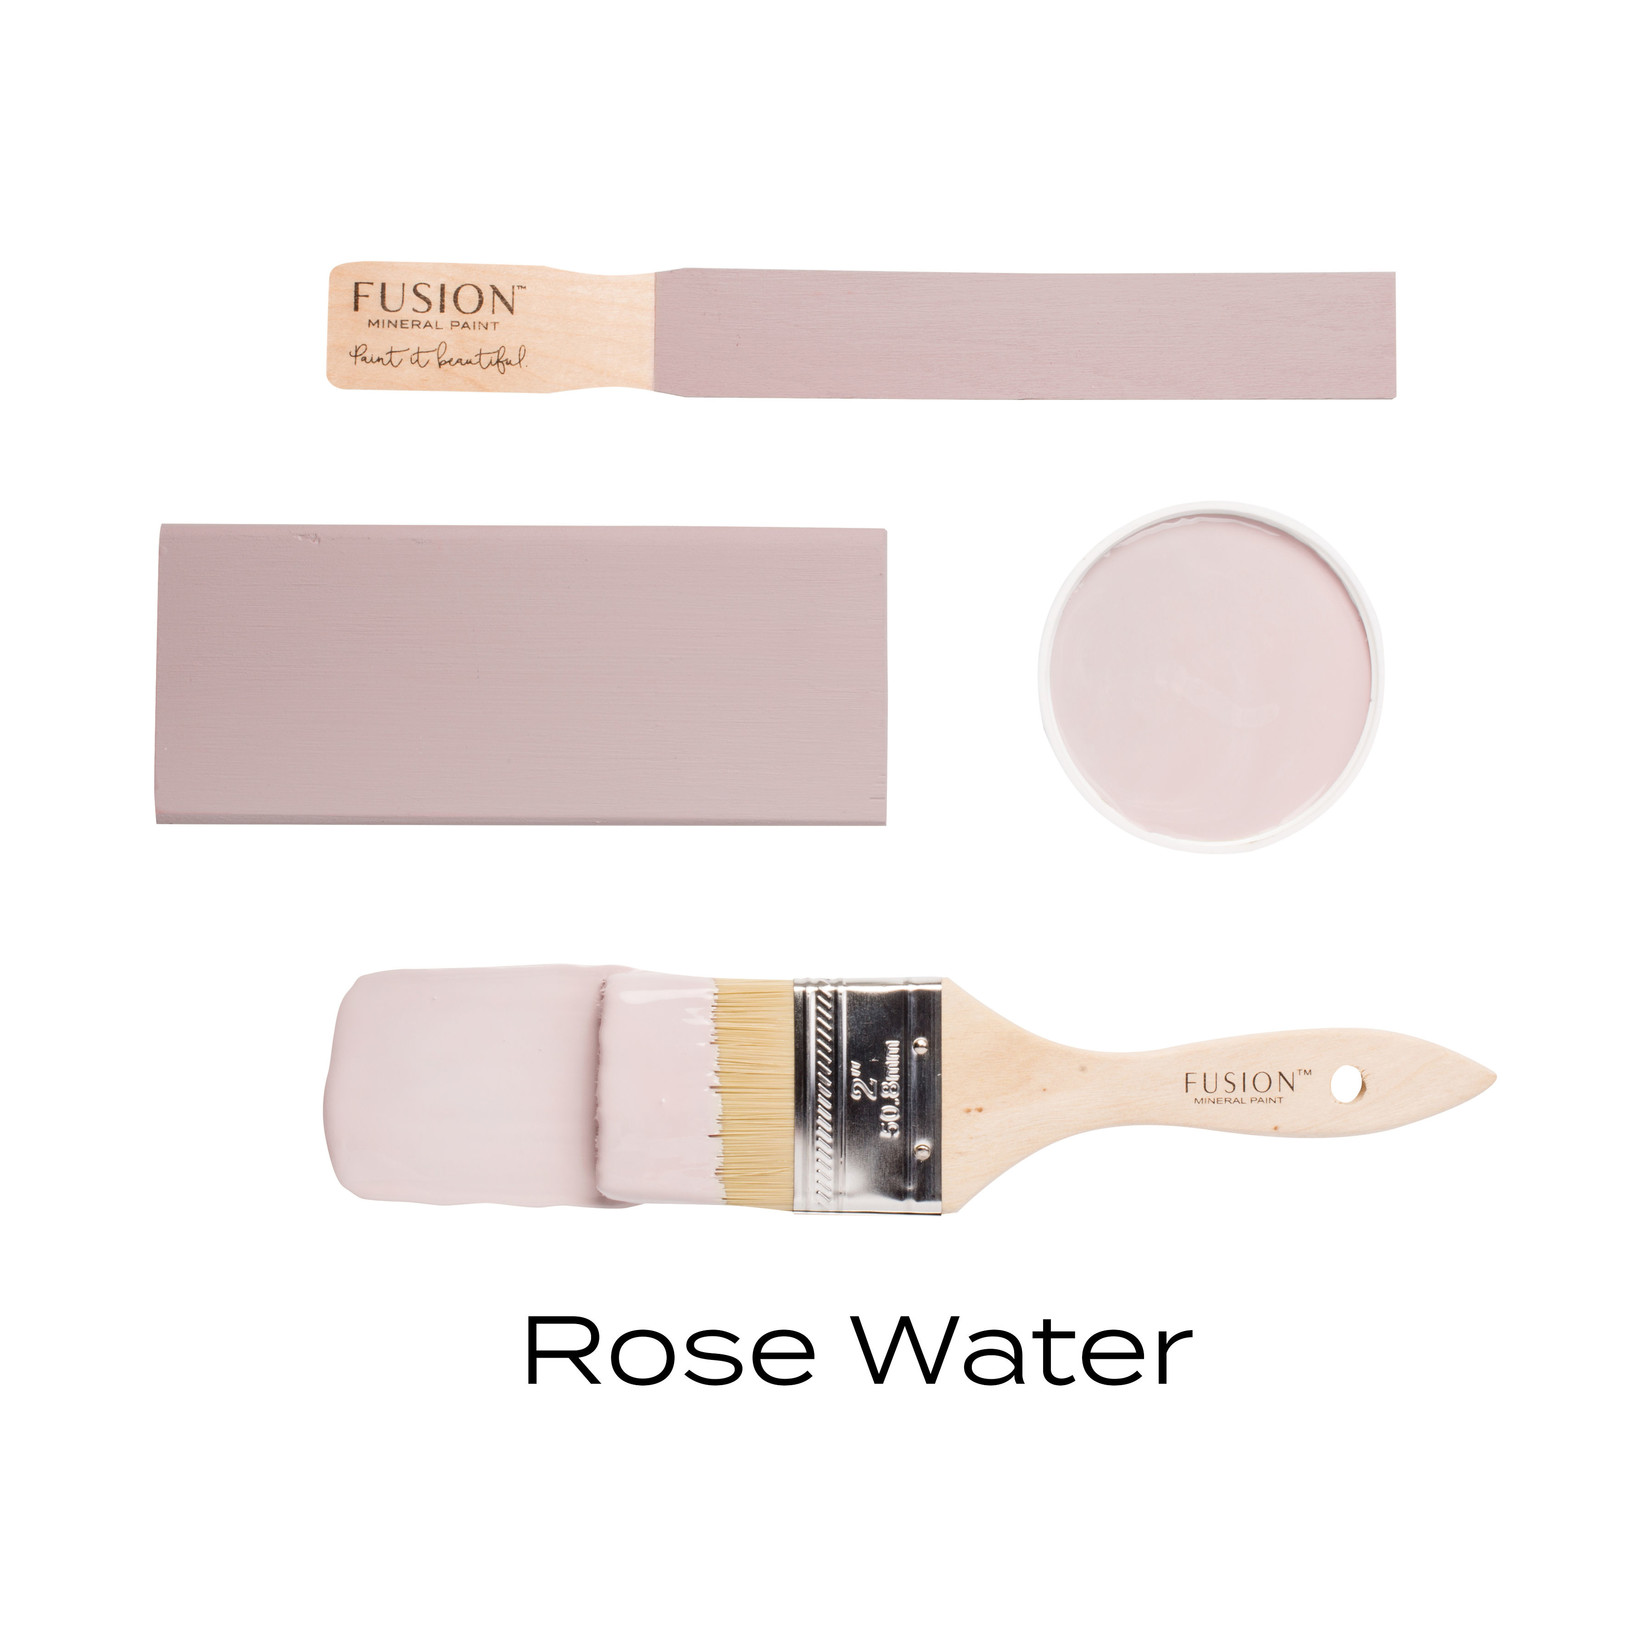 Fusion Mineral Paint™ - Rose Water